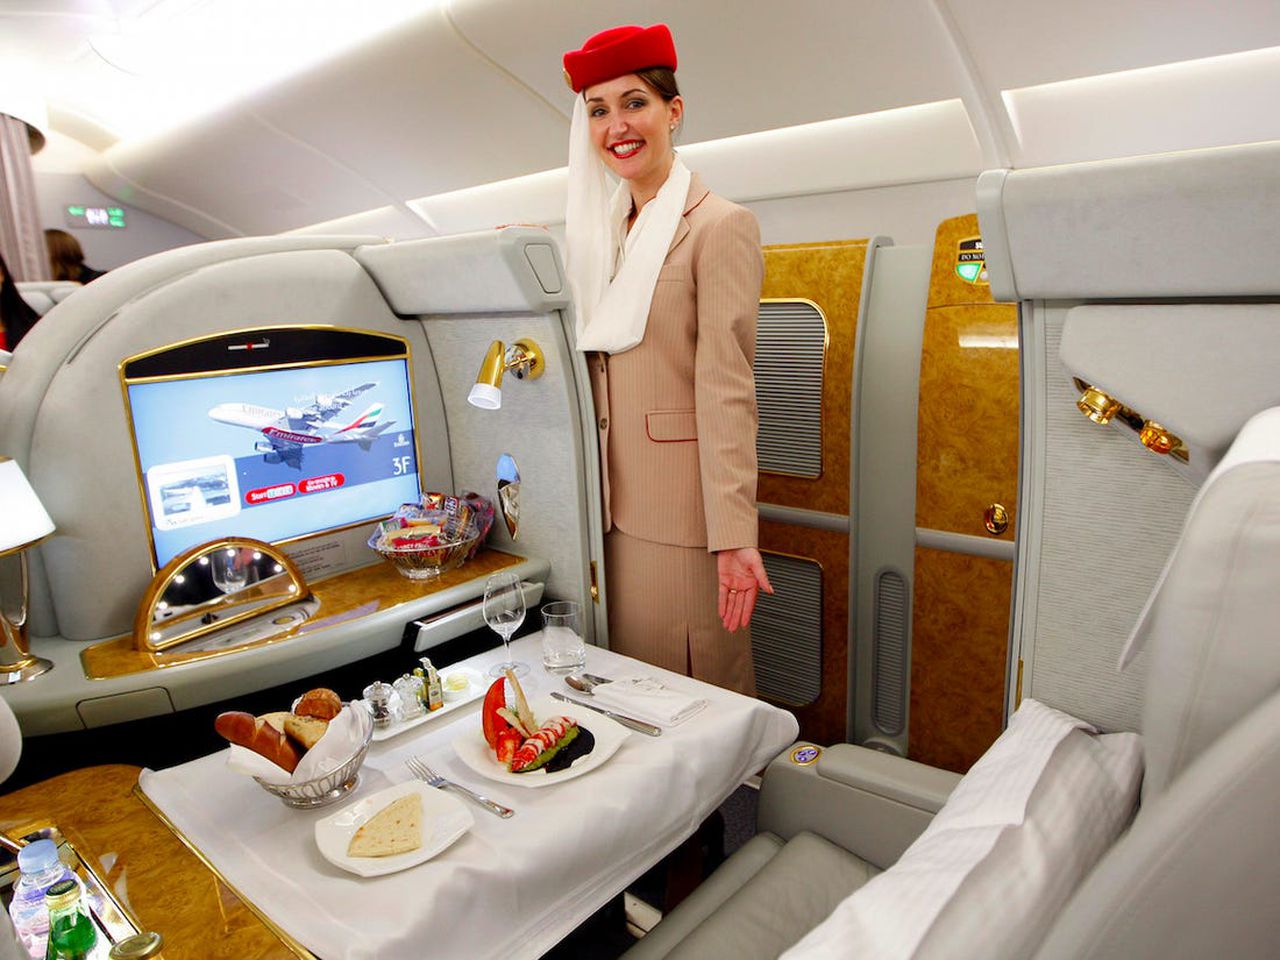 Emirates to resume passenger flights from May 21